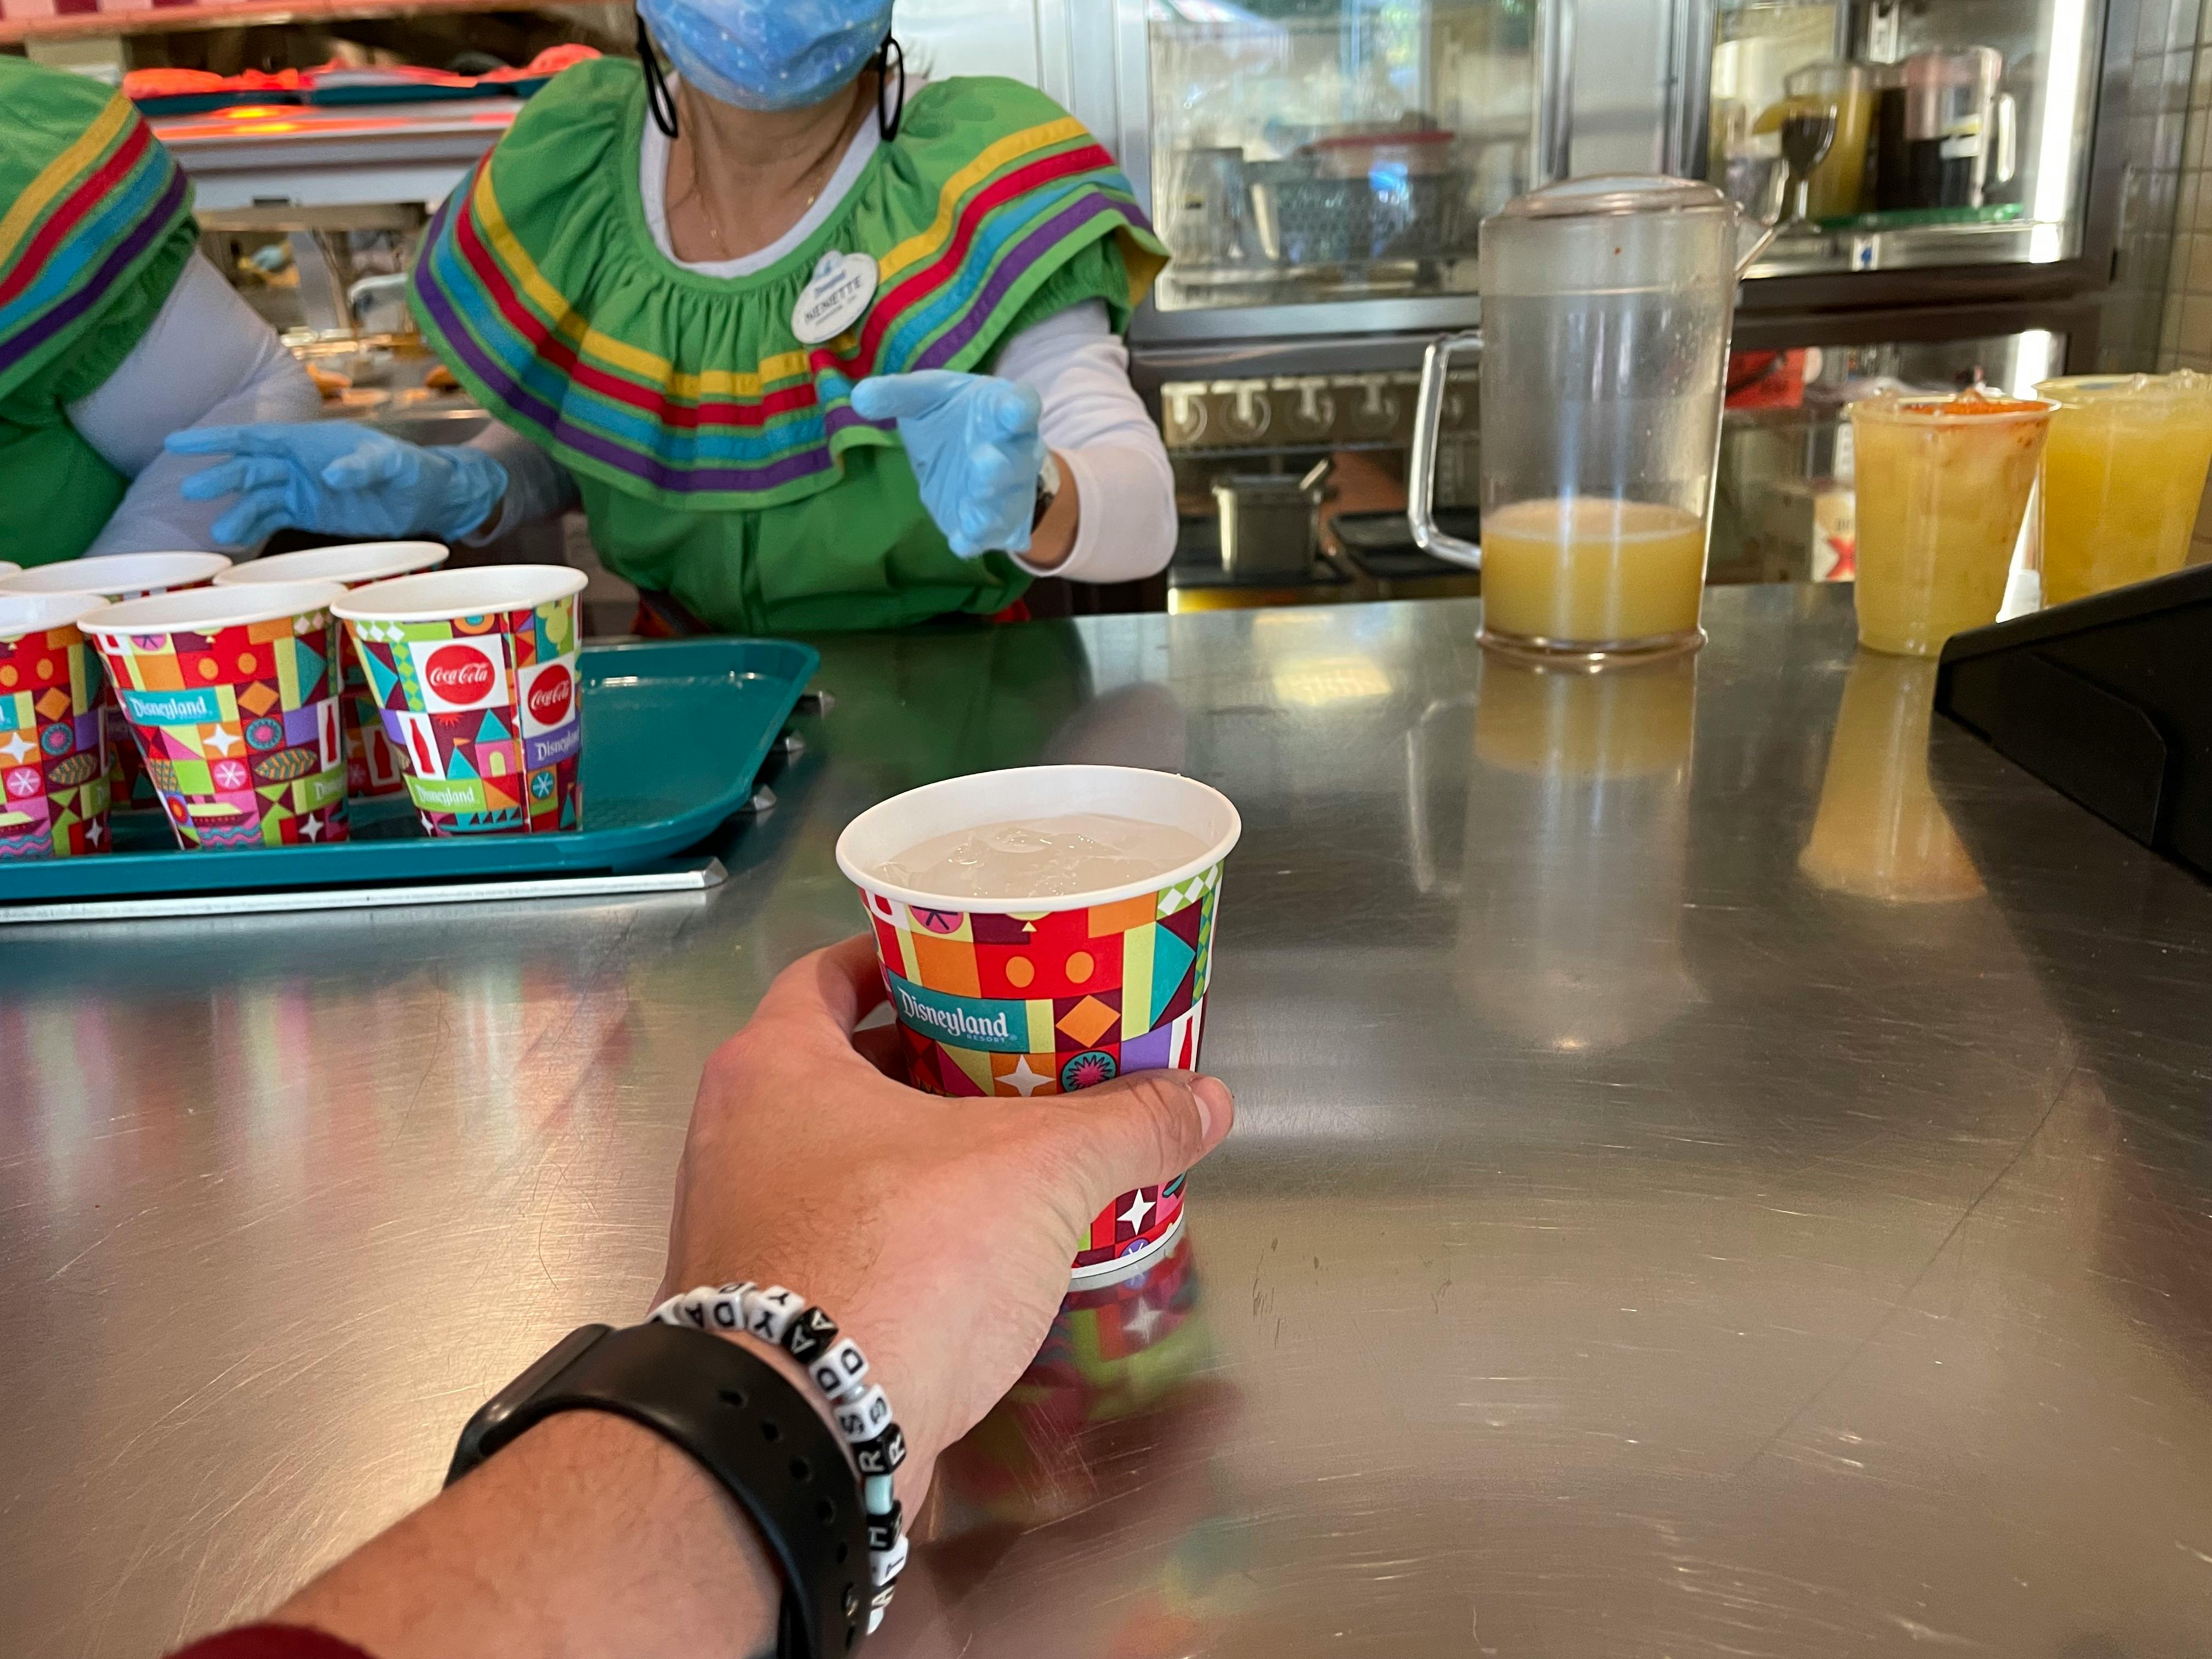 A person taking a free water cup from a counter inside a restaurant at Disneyland.